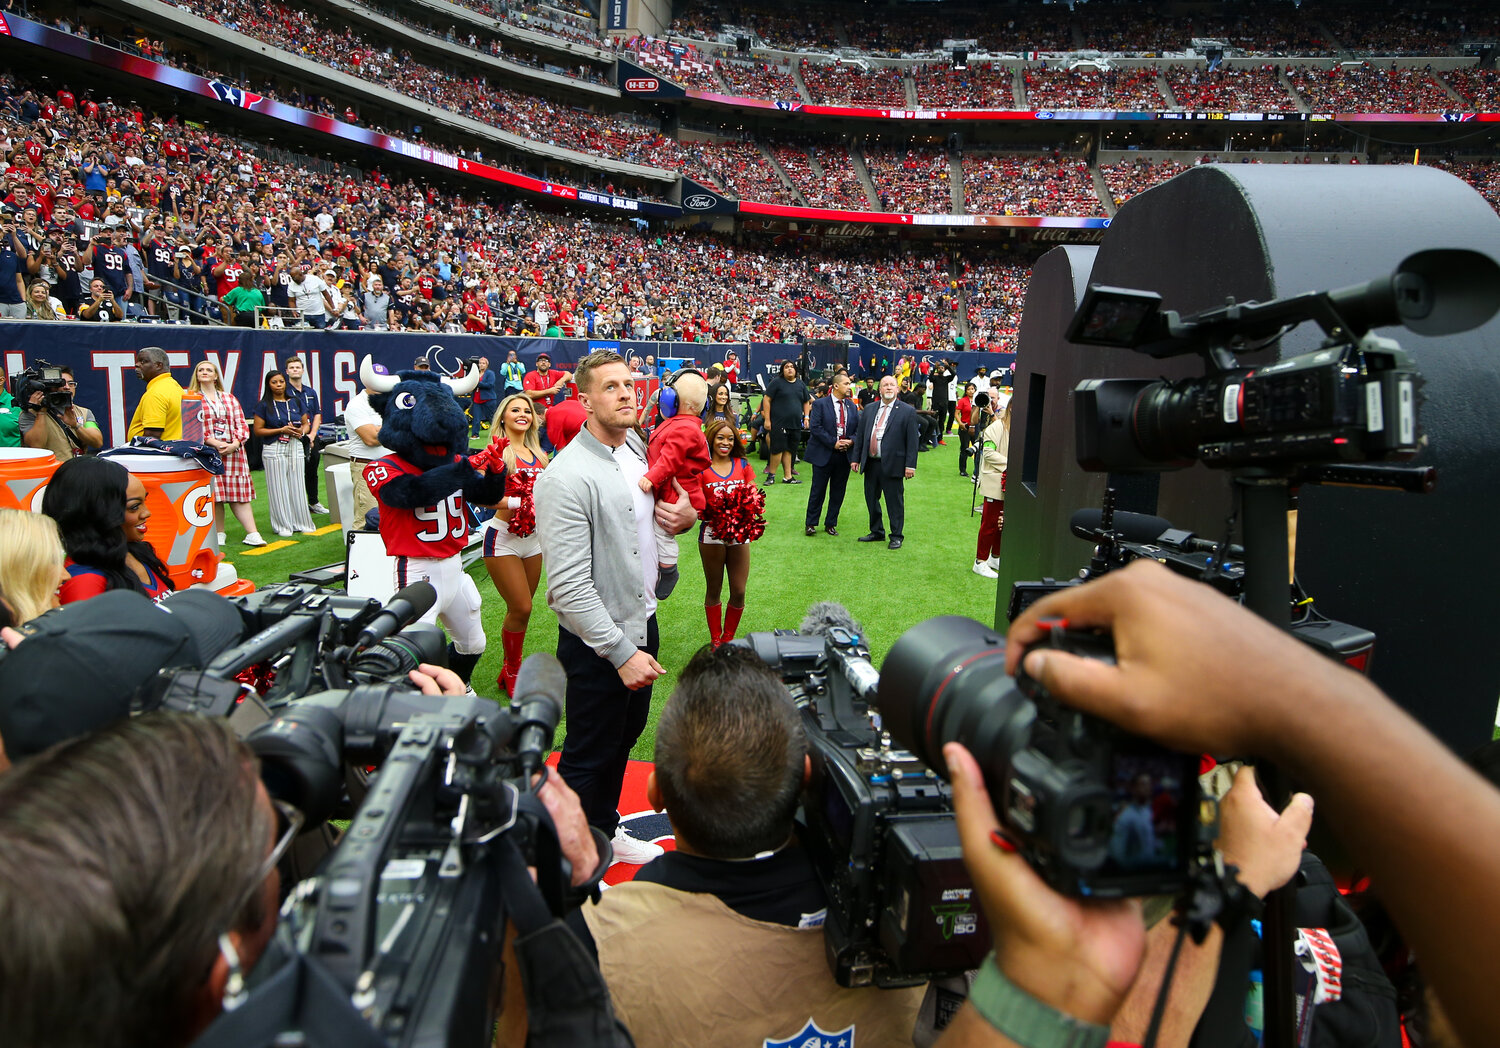 Former Houston Texans player JJ Watt prepares to be inducted into the Texans’ Ring of Honor at halftime during an NFL game between the Texans and the Steelers on October 1, 2023 in Houston.